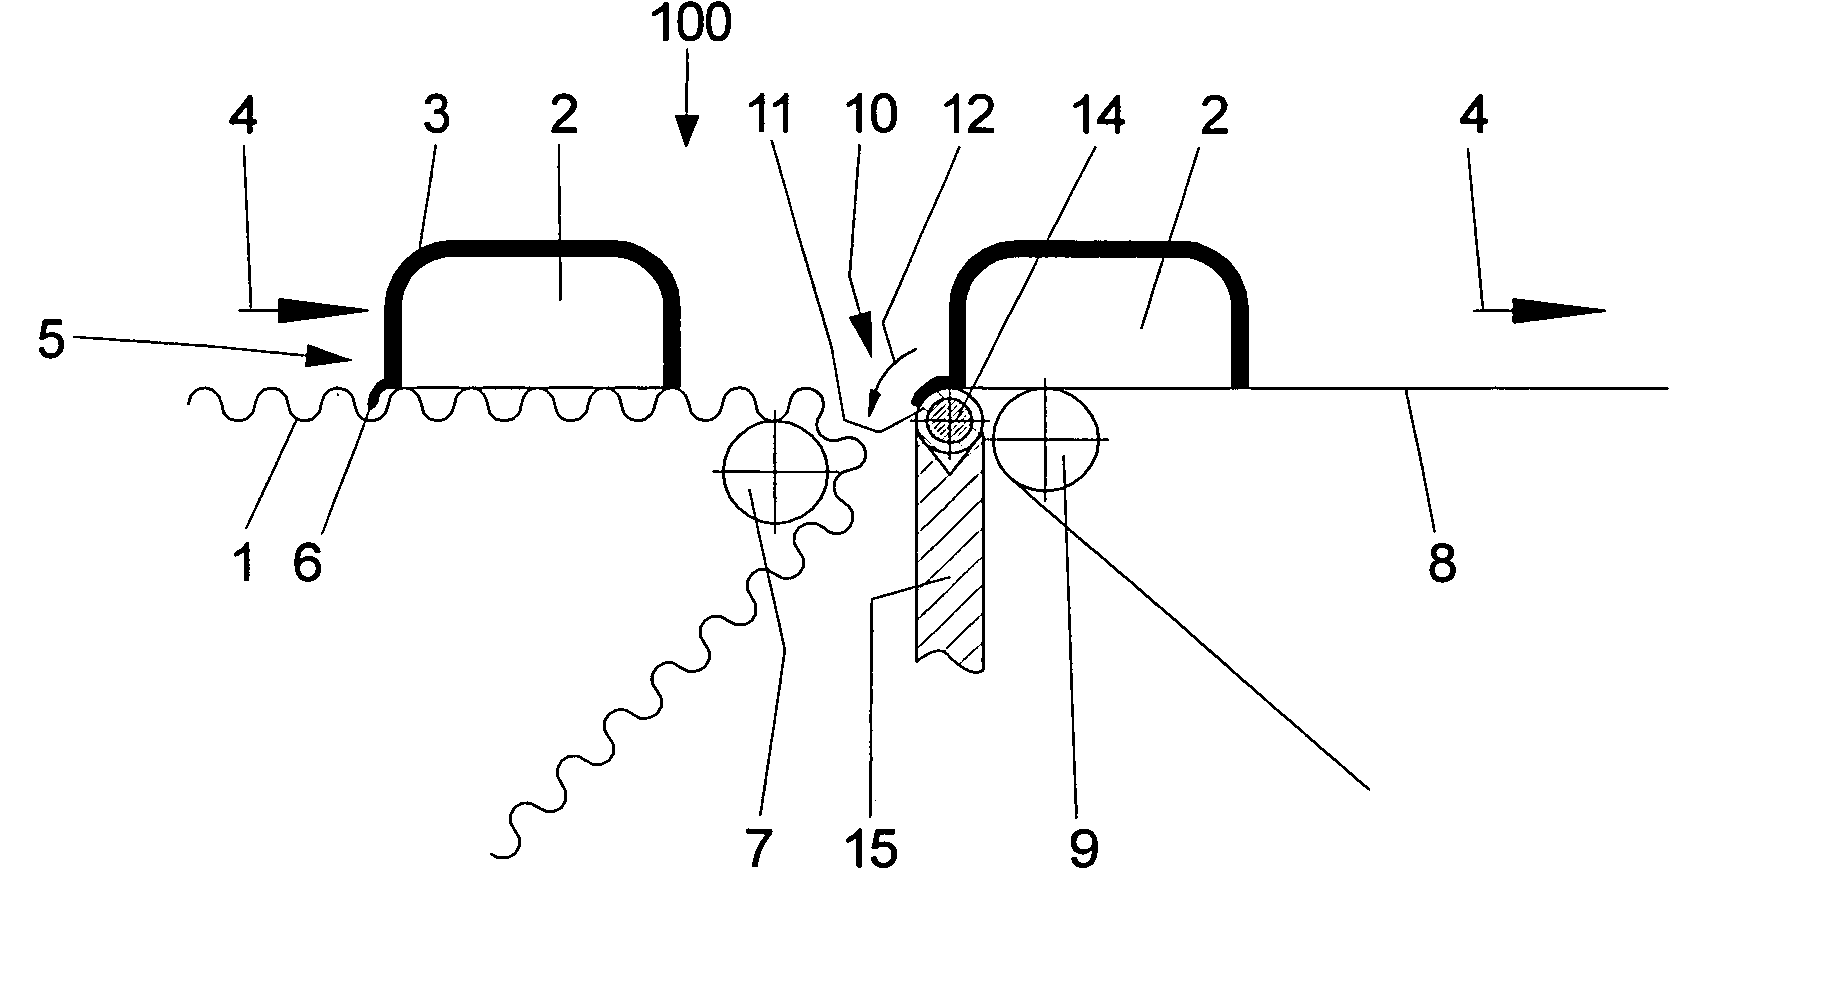 Apparatus for removing molten mass from confectionaries